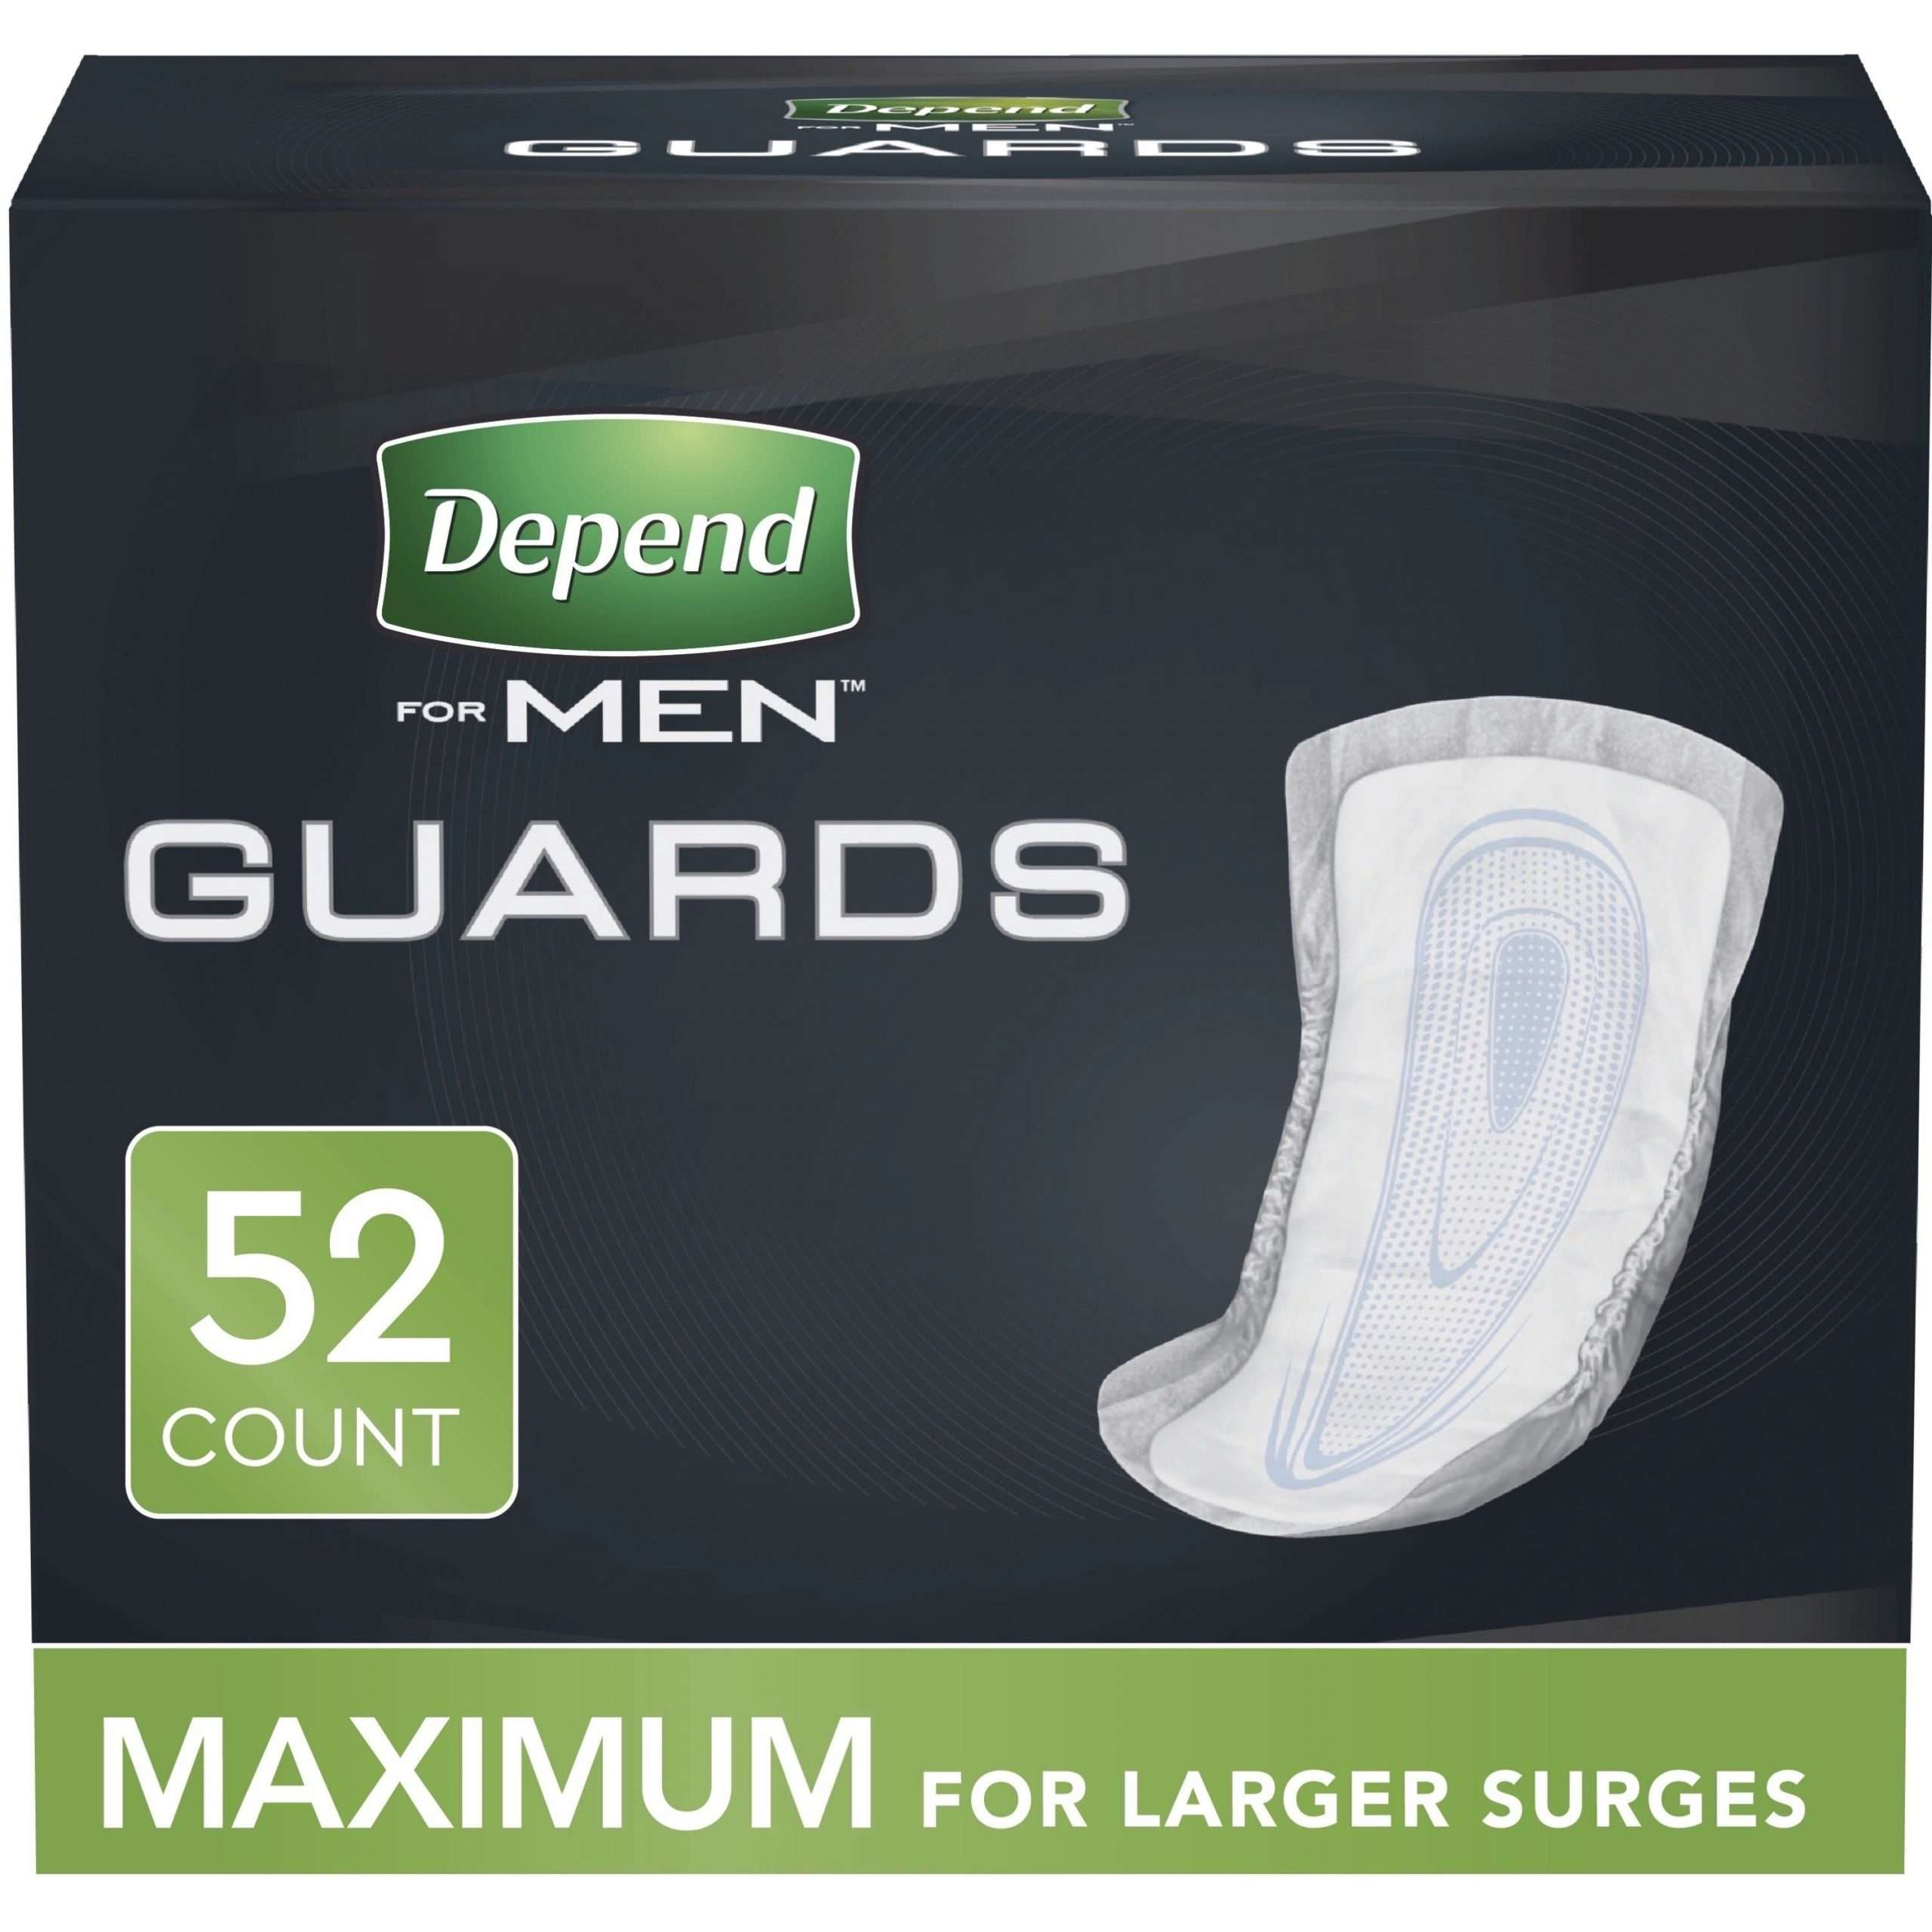 Depend Incontinence Guards/Bladder Control Pads for Men, Maximum, 52 ...